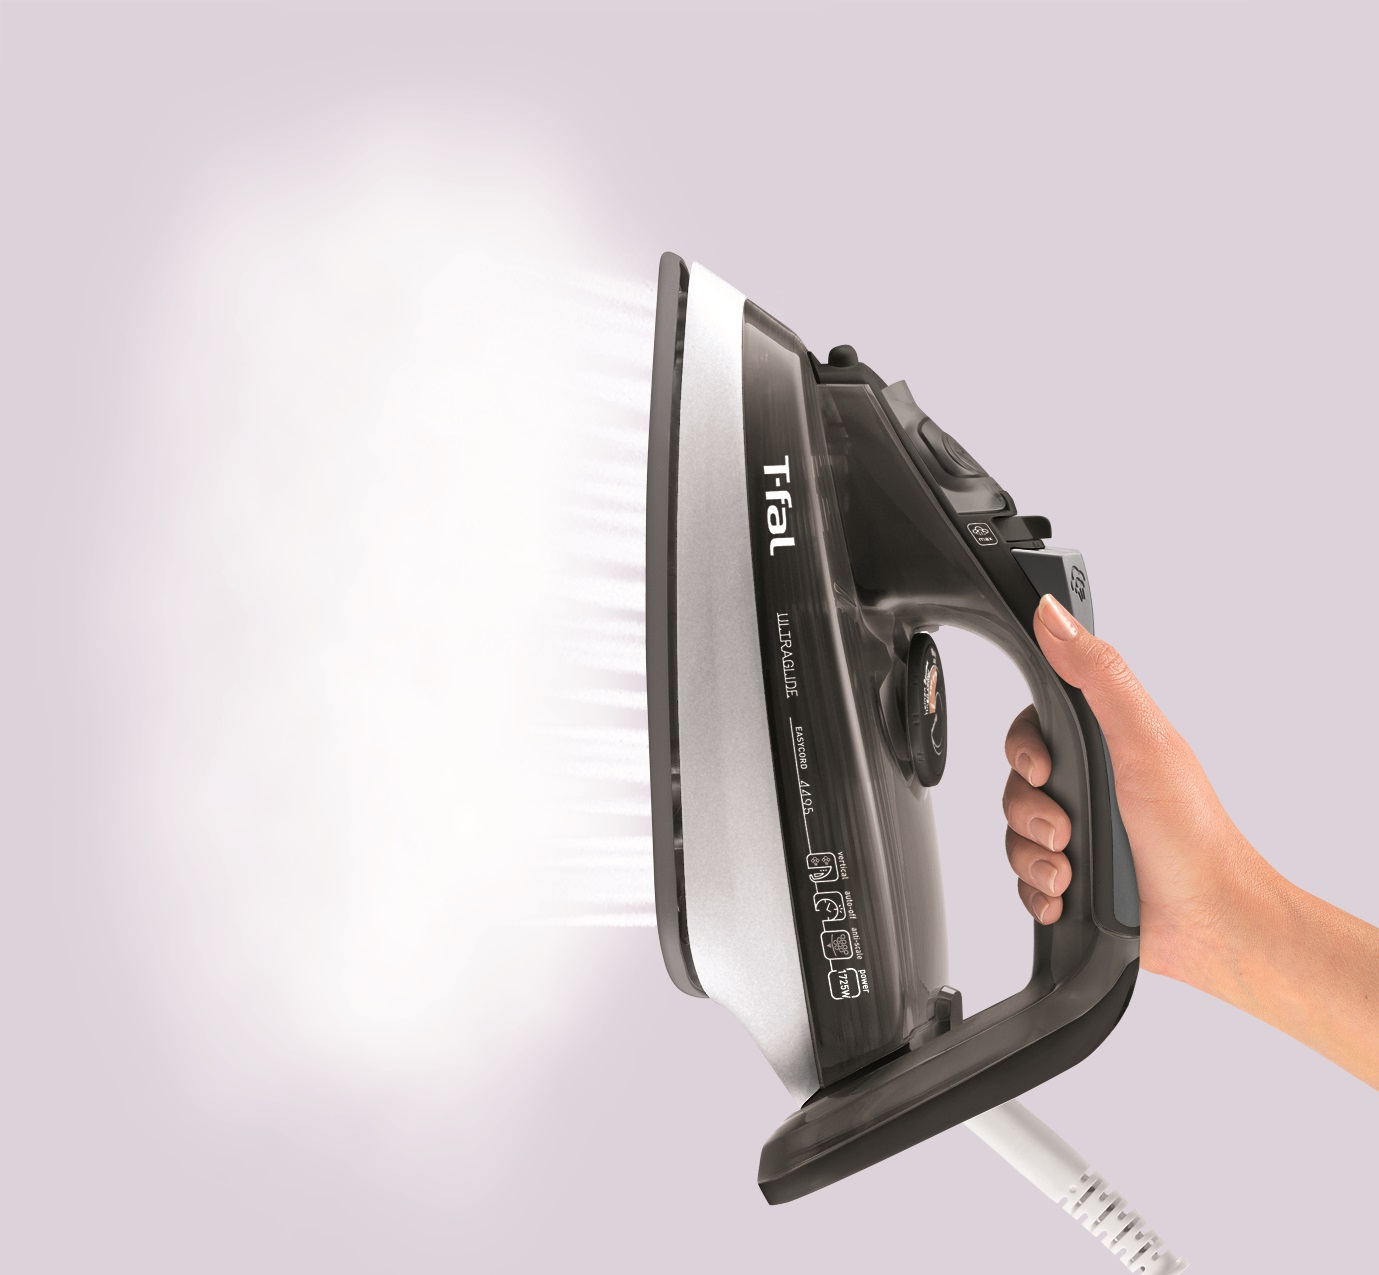 Innovative Design for Precision Ironing: Explore the Features of the T-fal FV4495 Ultraglide Steam Iron